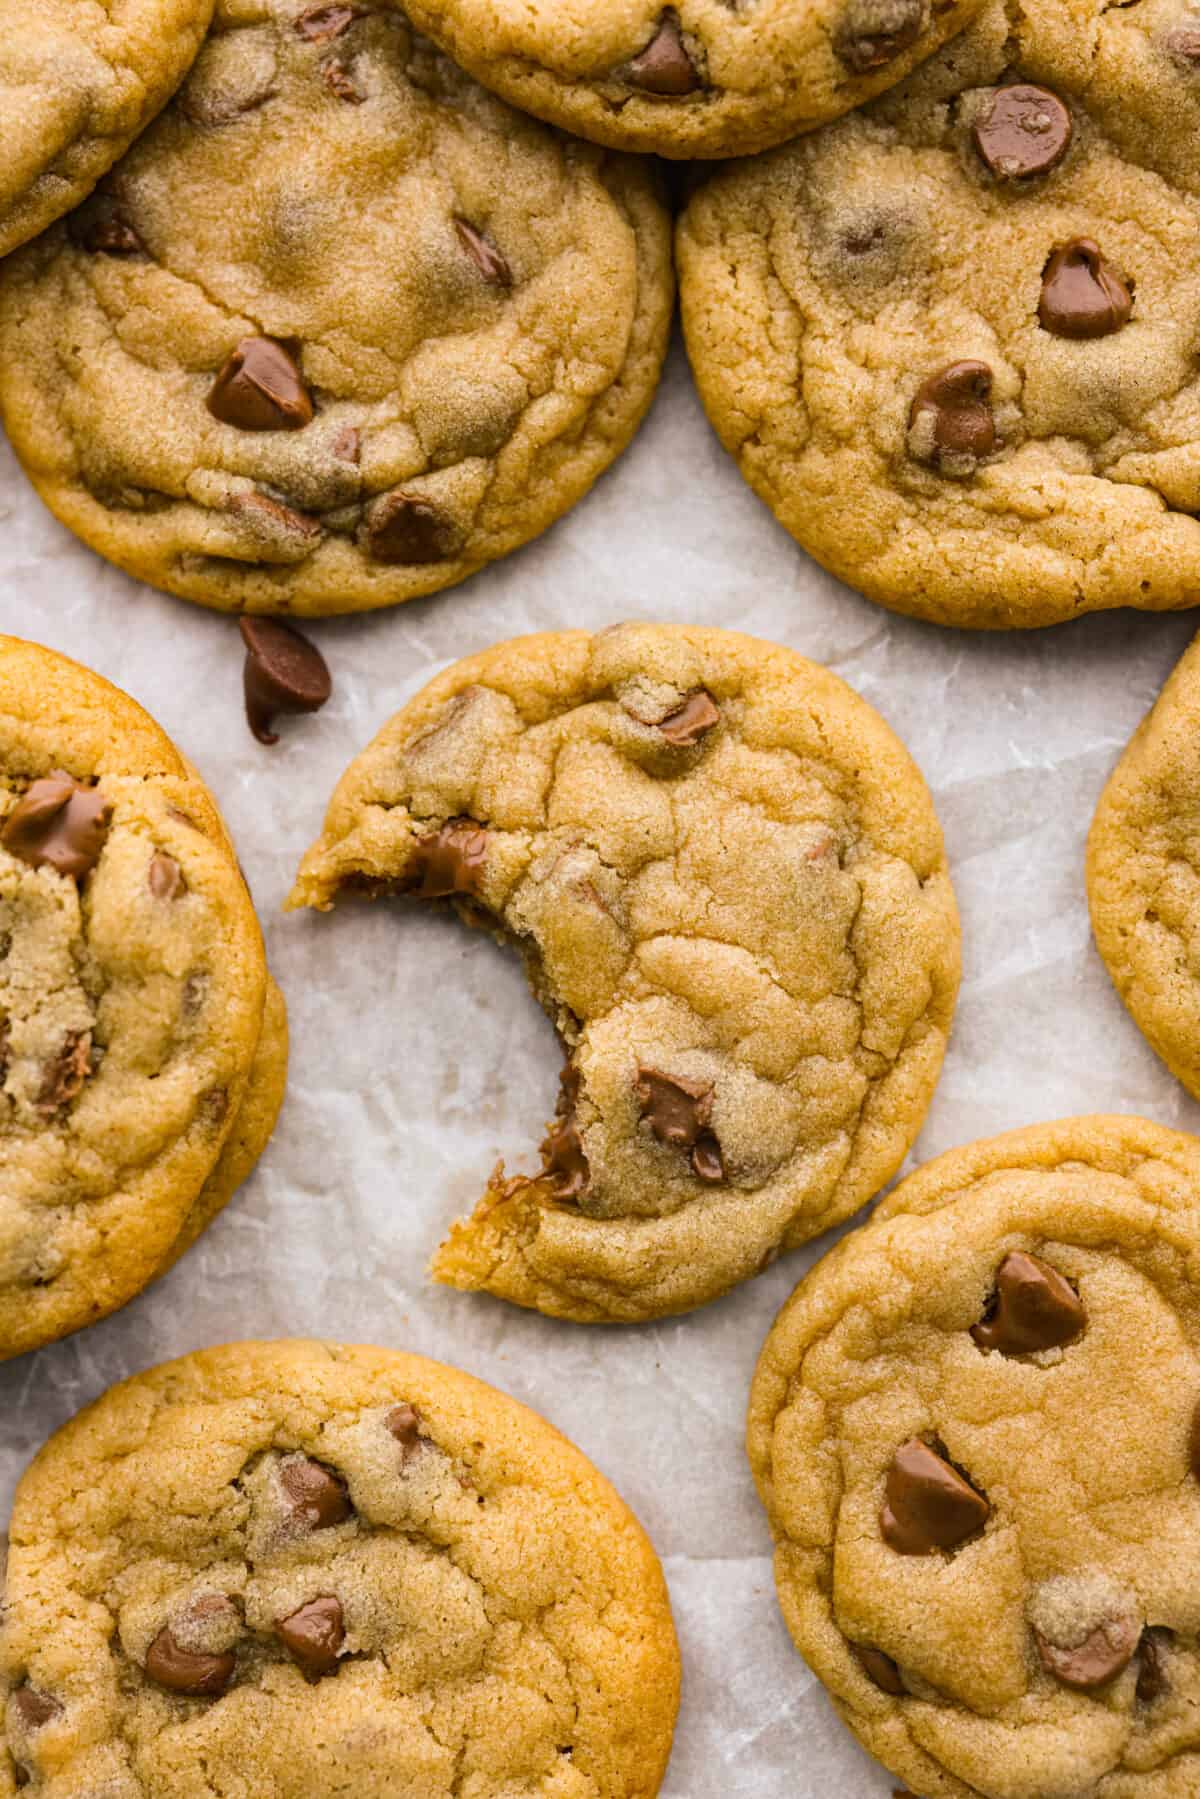 Top view of chocolate chip pudding cookies with a bite out of one of them.